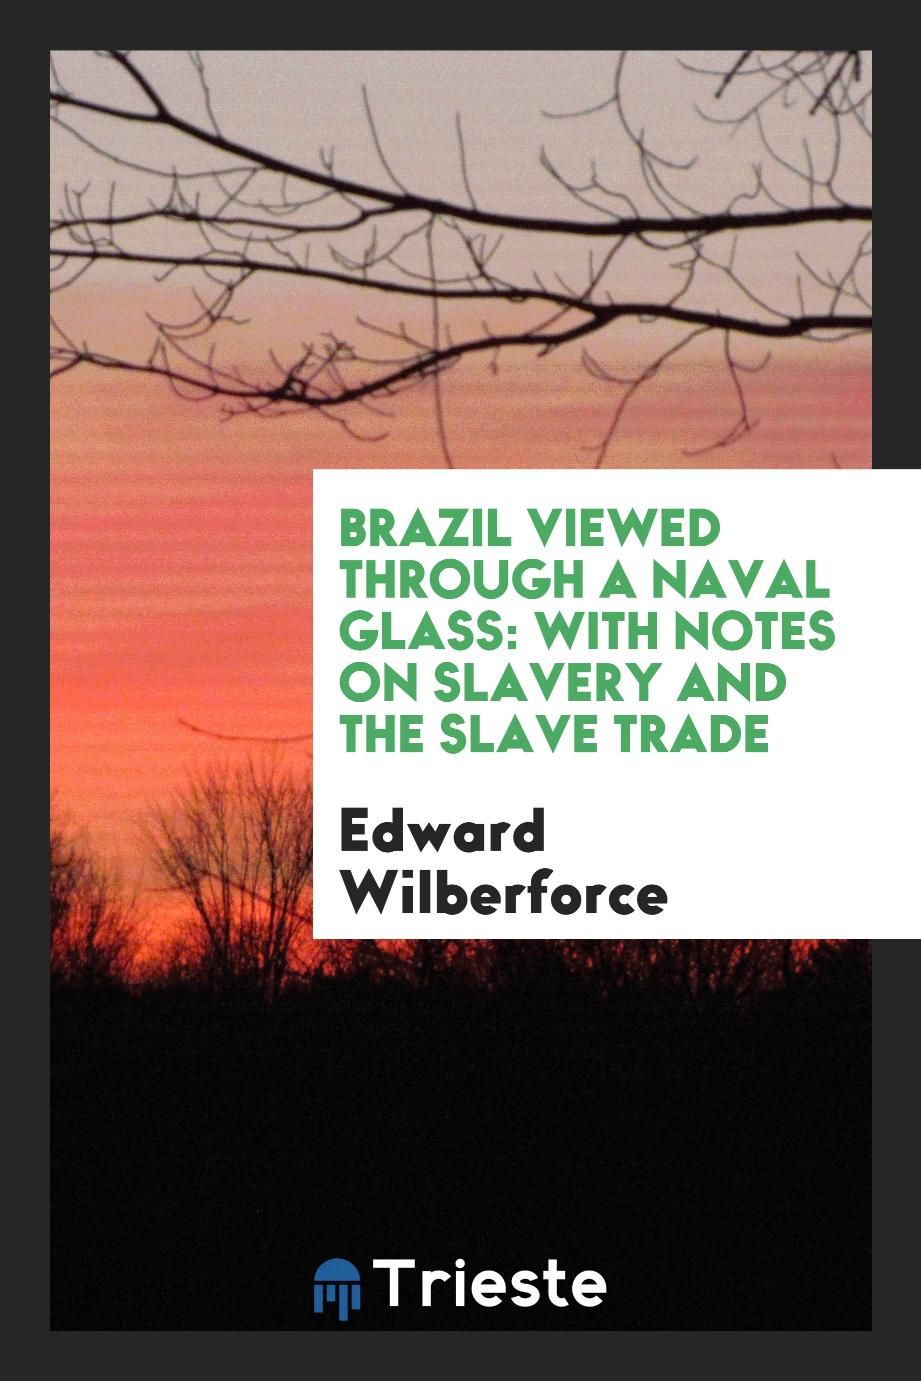 Brazil viewed through a naval glass: with notes on slavery and the slave trade